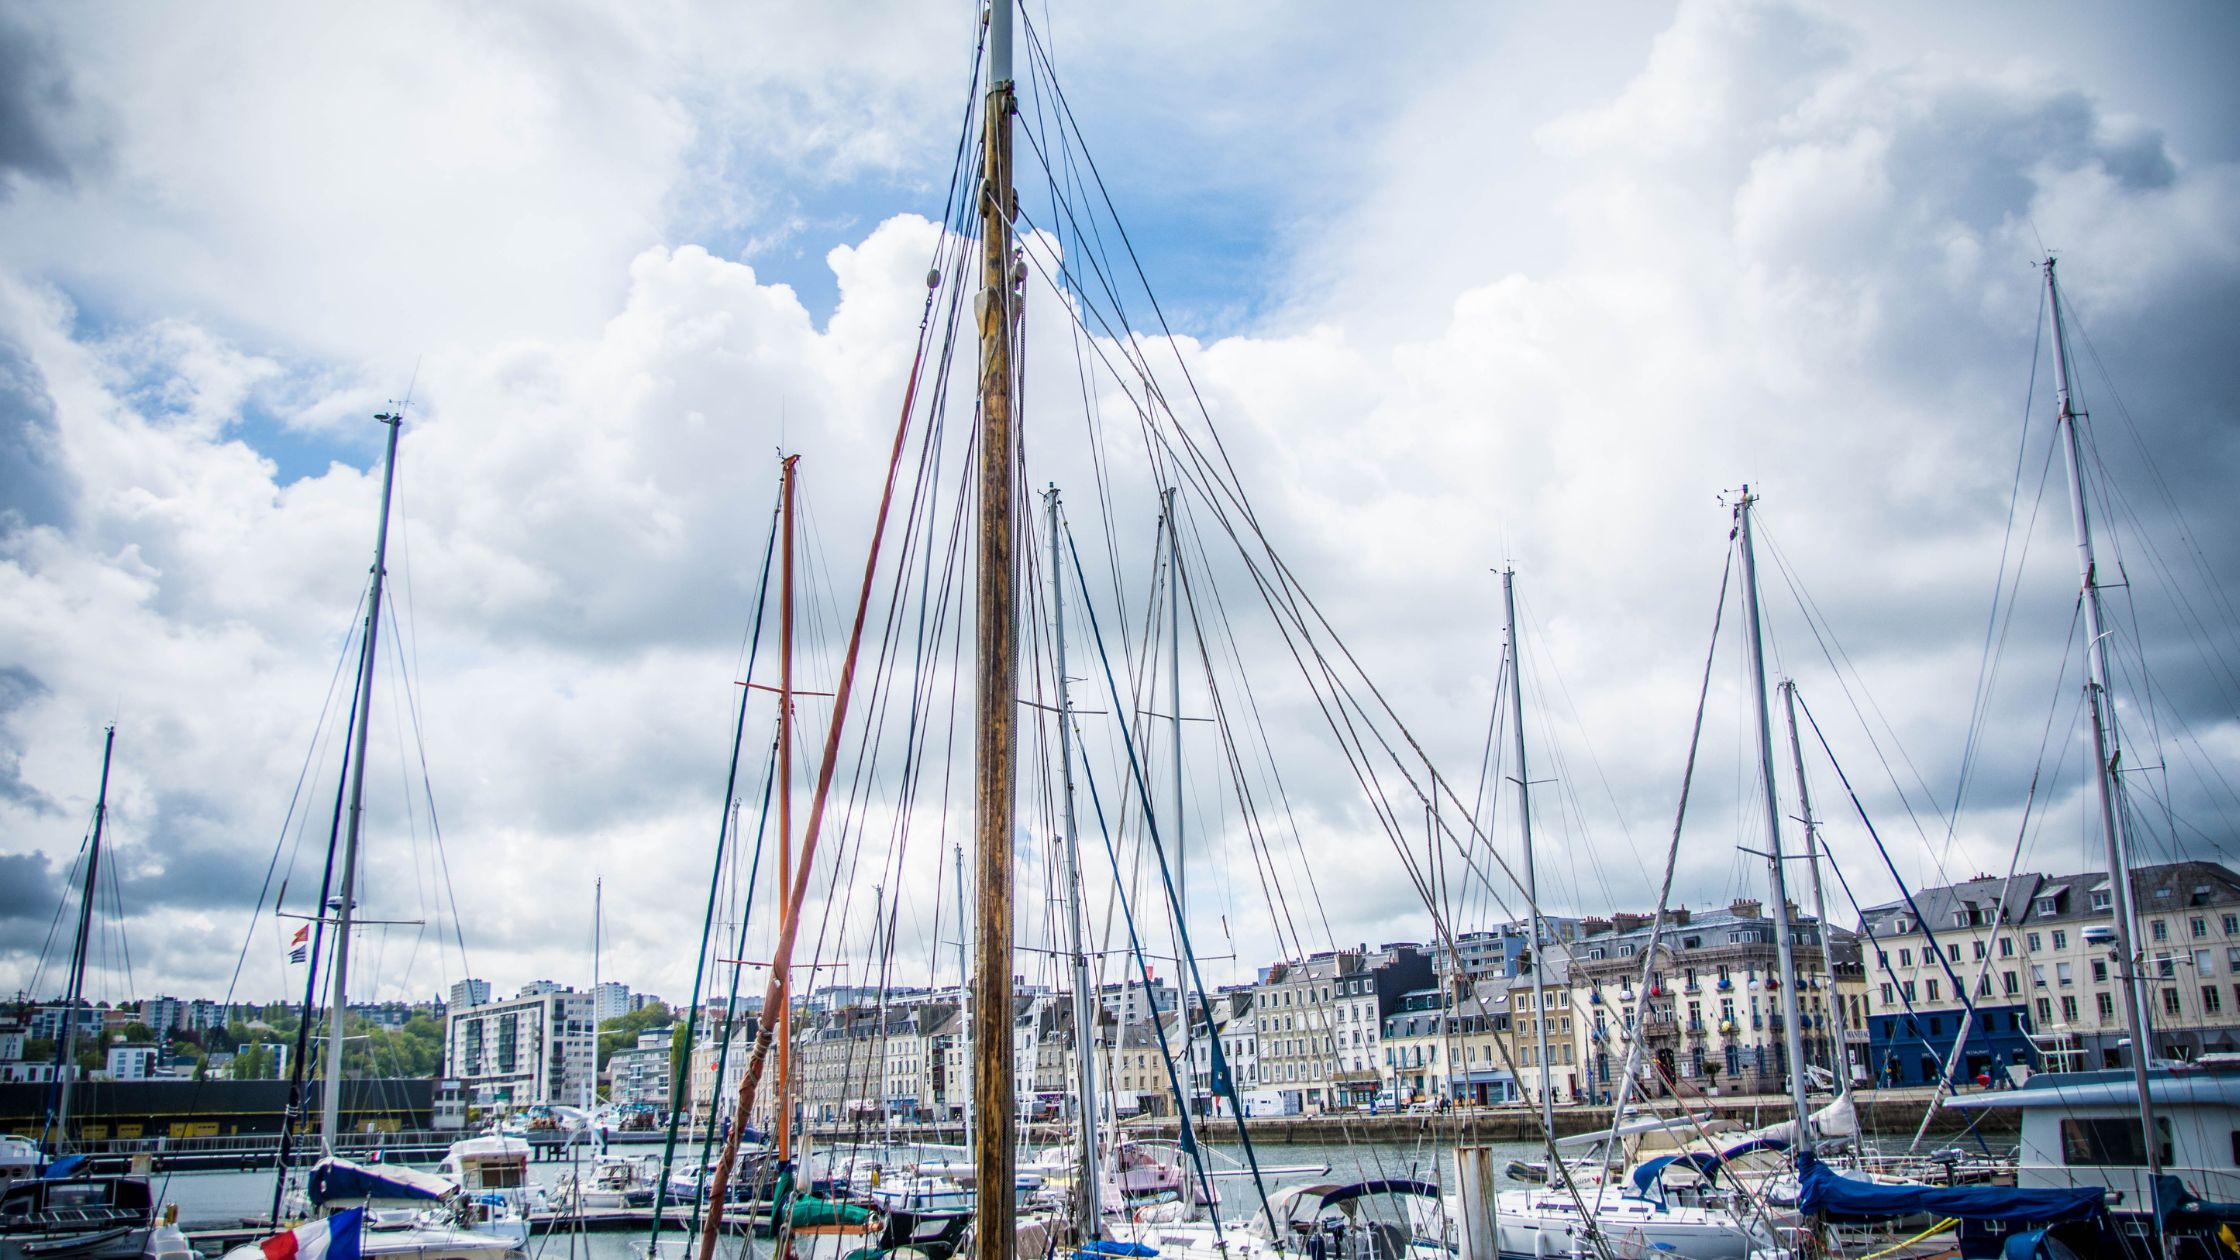 Cherbourg – Paris: the perfect day trip